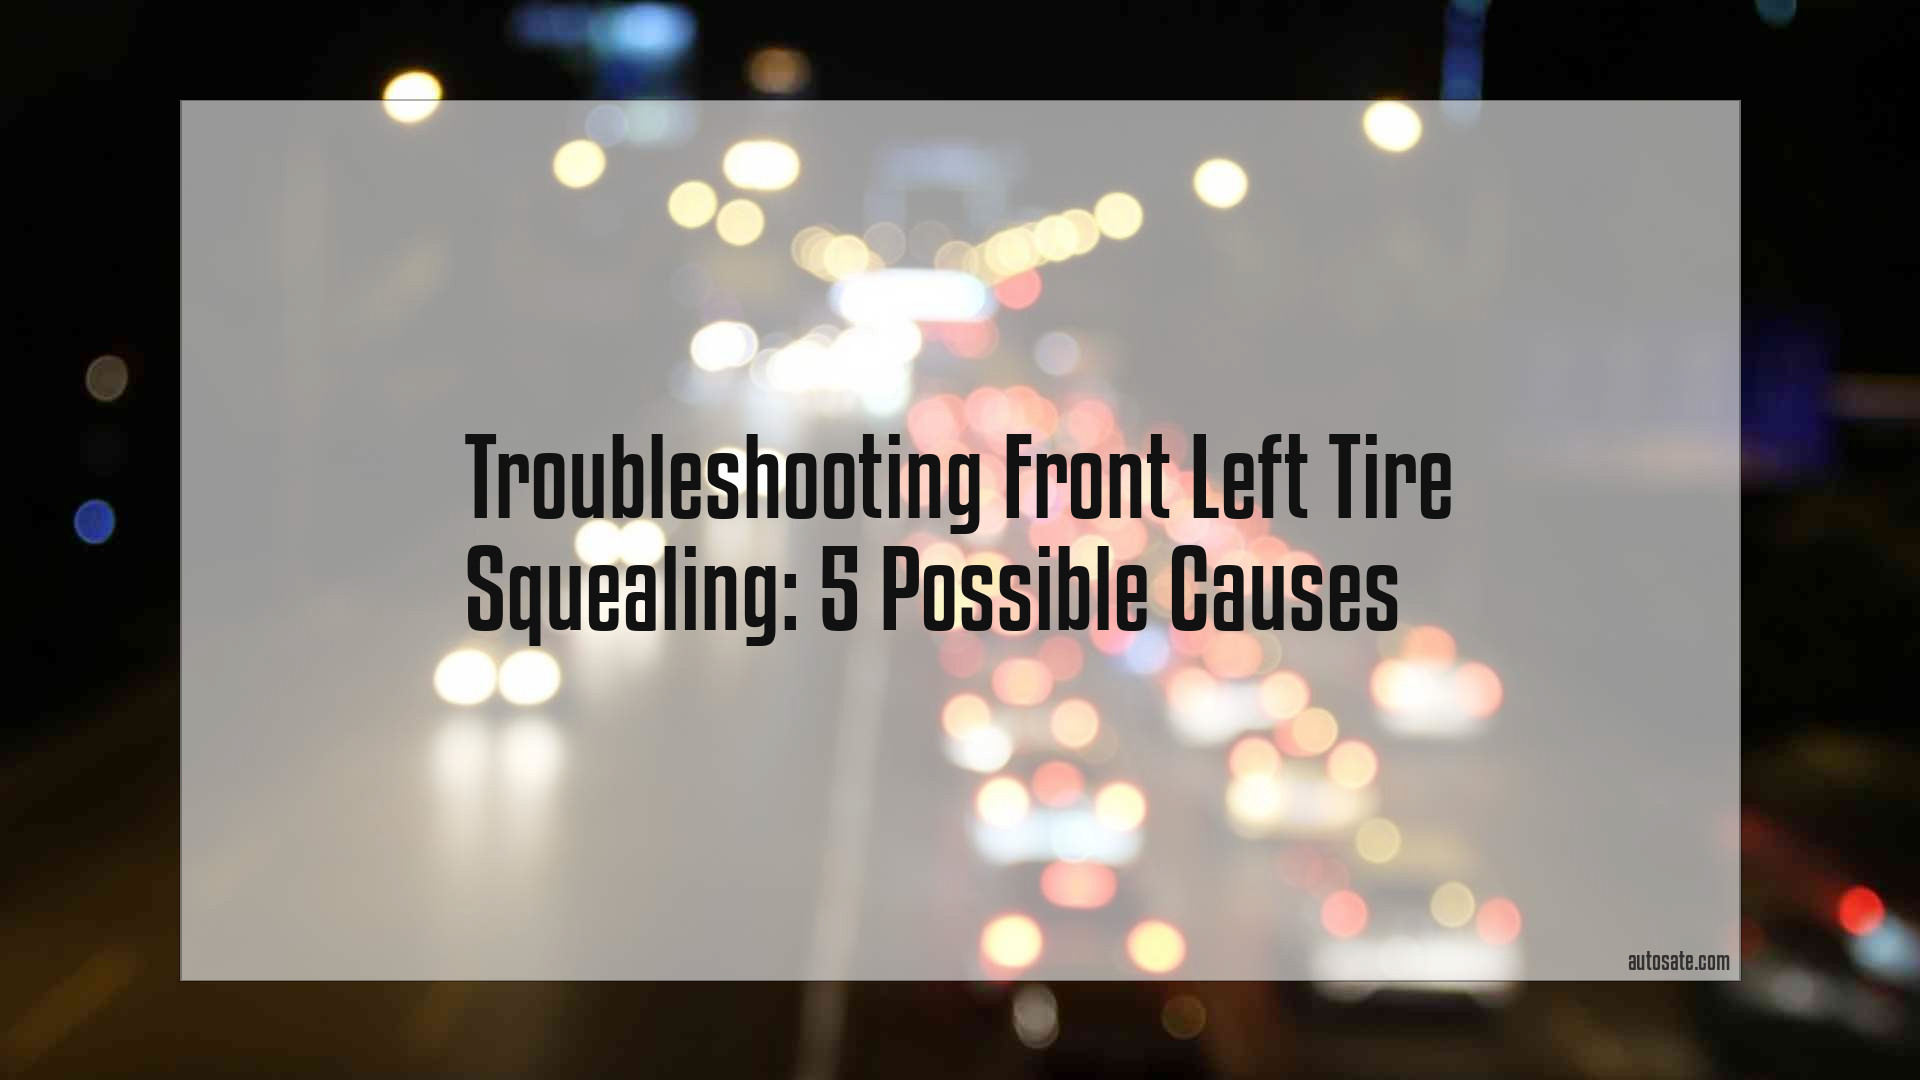 Troubleshooting Front Left Tire Squealing: 5 Possible Causes